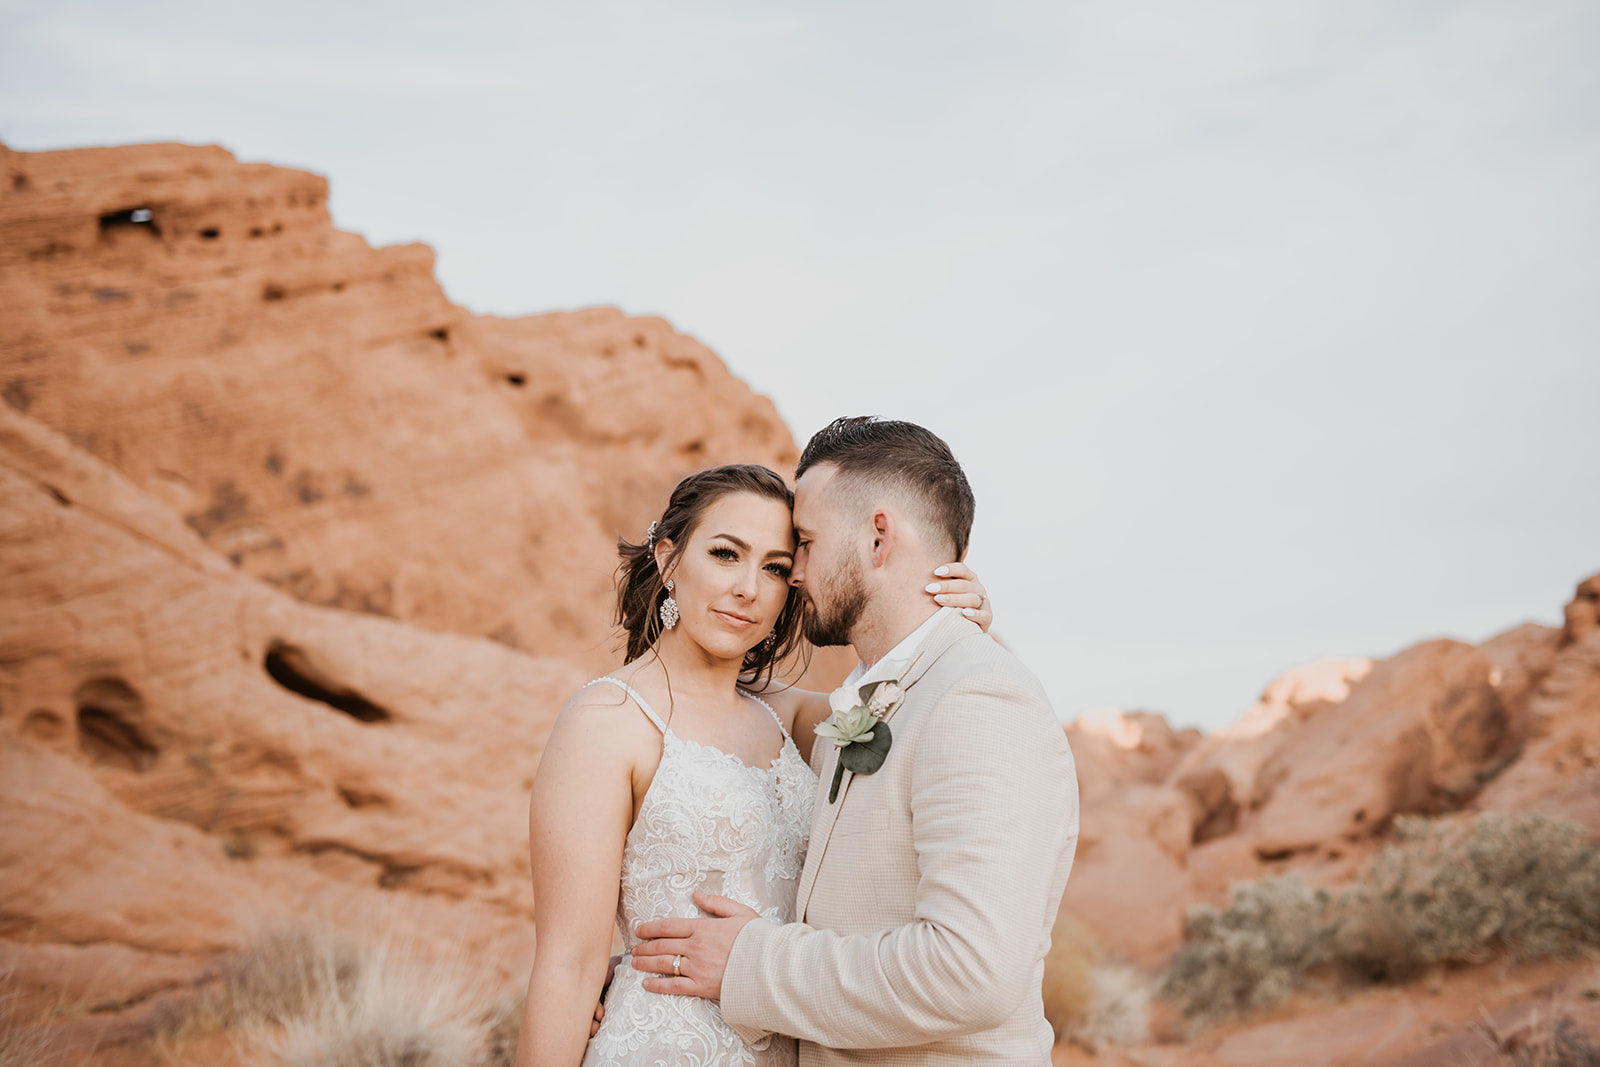 Valley of Fire Wedding & Elopement Planning Guide. Newlywed couple posing together during their elopement shoot coordinated by Elopement Las Vegas.